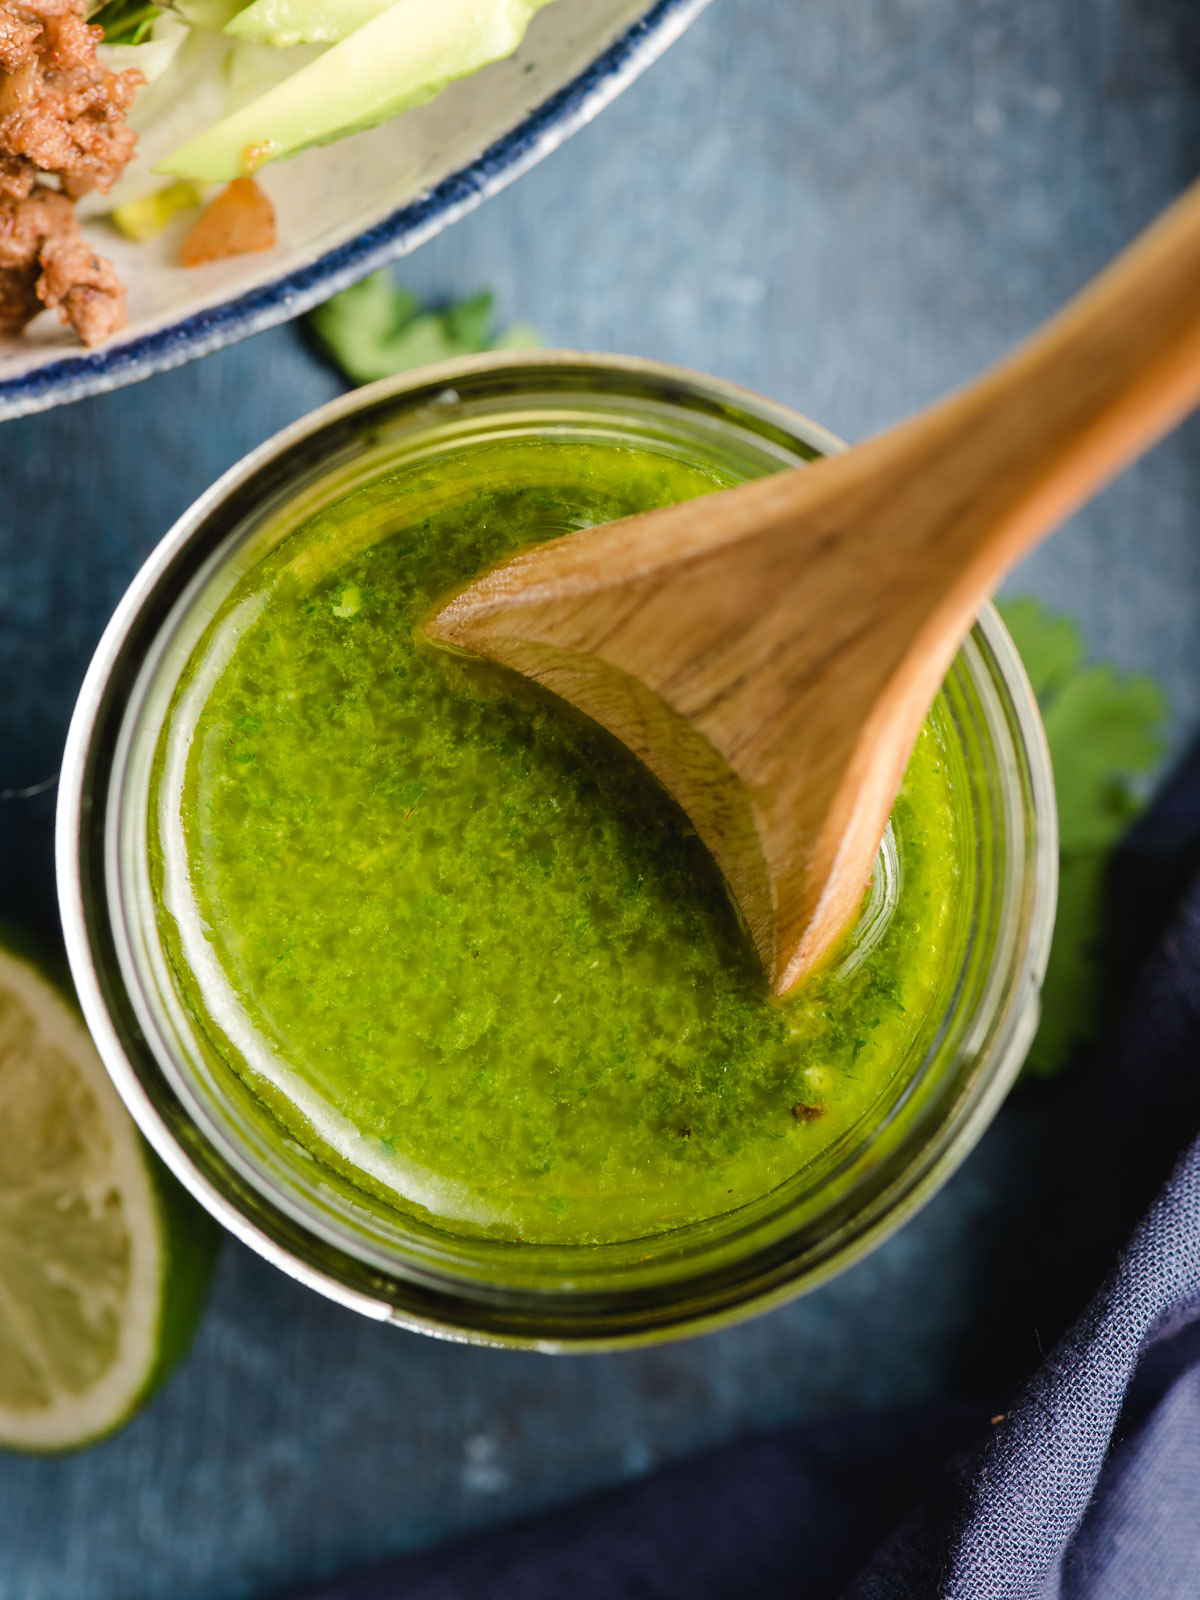 A spoon mixes a jar of homemade Cilantro Lime Vinaigrette that will serve as taco salad dressing.